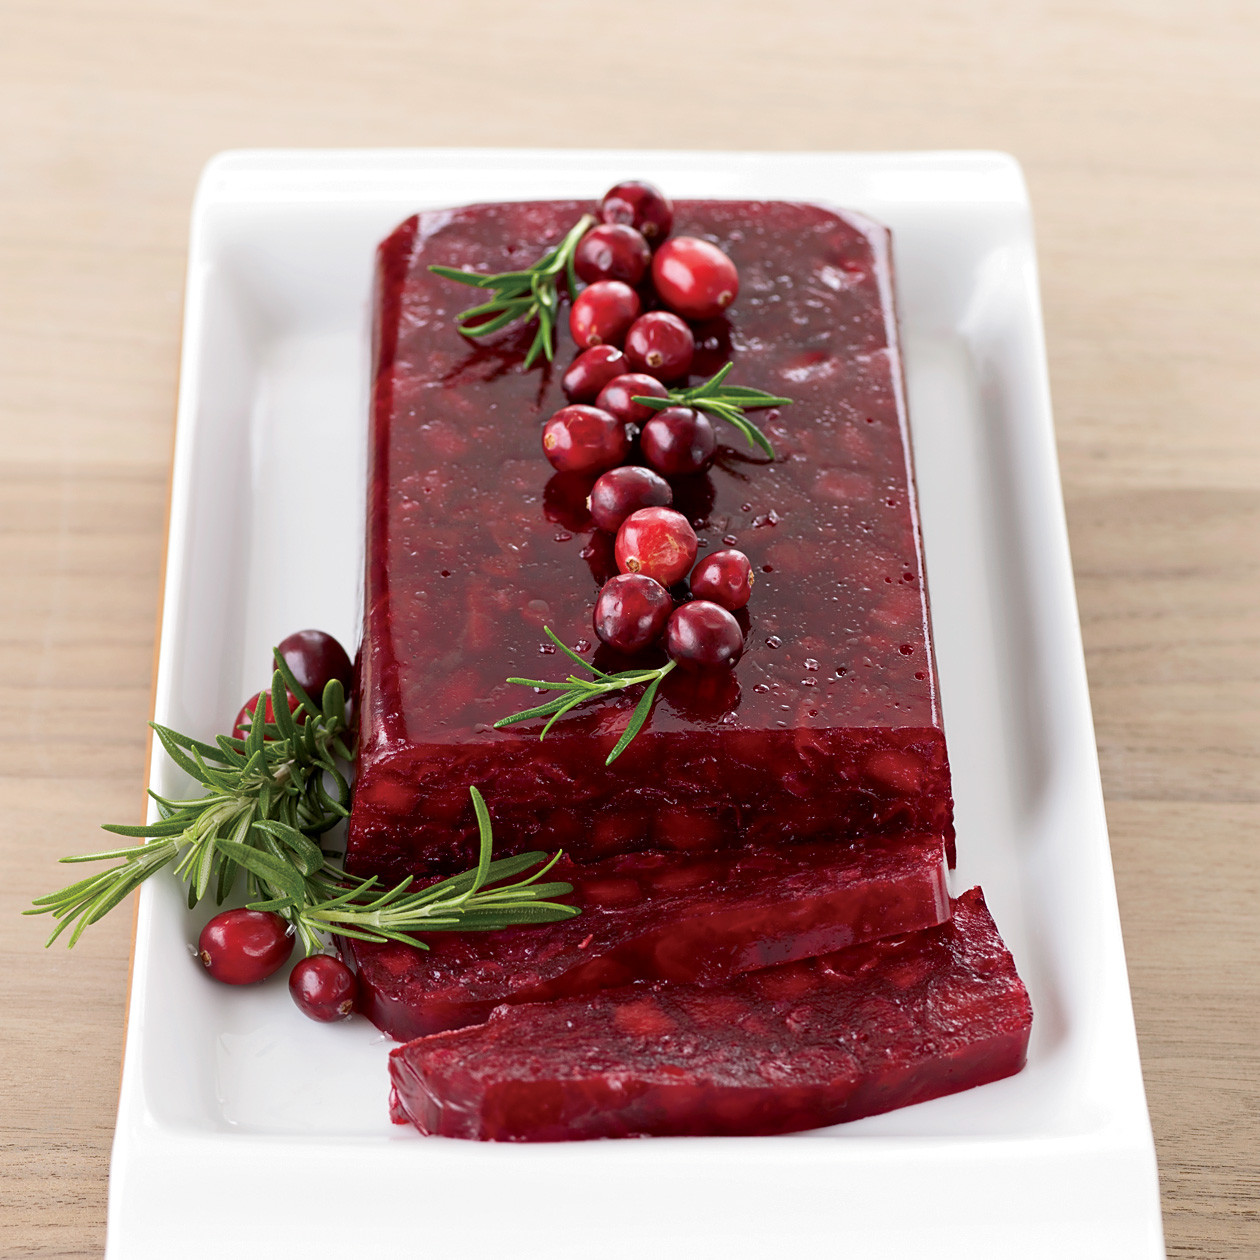 Cranberry Sauce Thanksgiving Side Dishes
 Perfecting Thanksgiving Dinner Best Cranberry Sauce